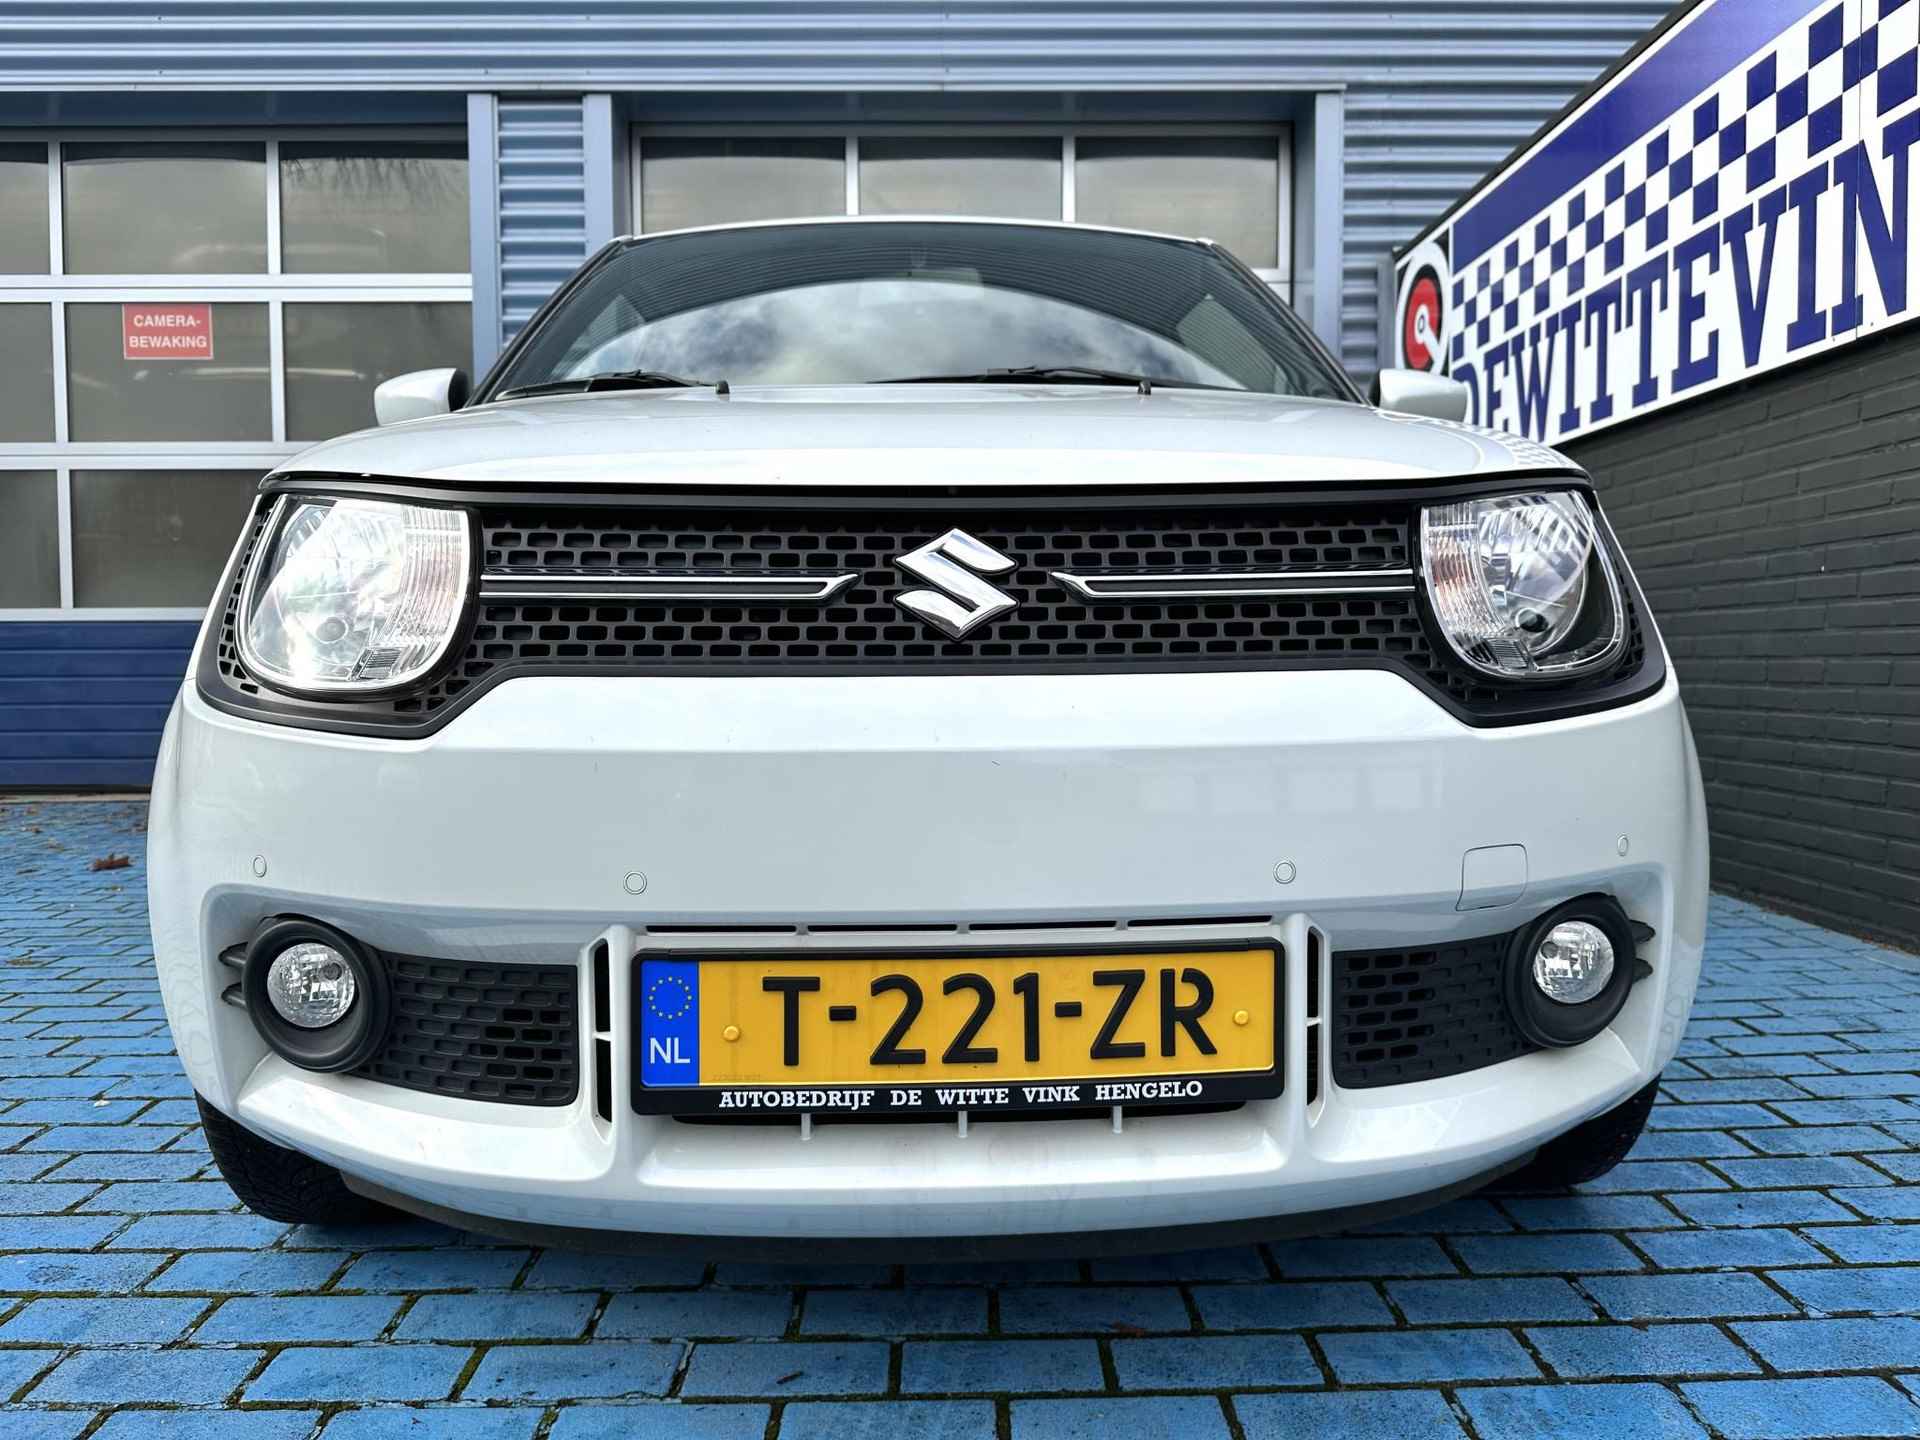 Suzuki Ignis 1.2 Comfort PDC V+A HOGE INSTAP AIRCO PDC BOVAG - 5/30